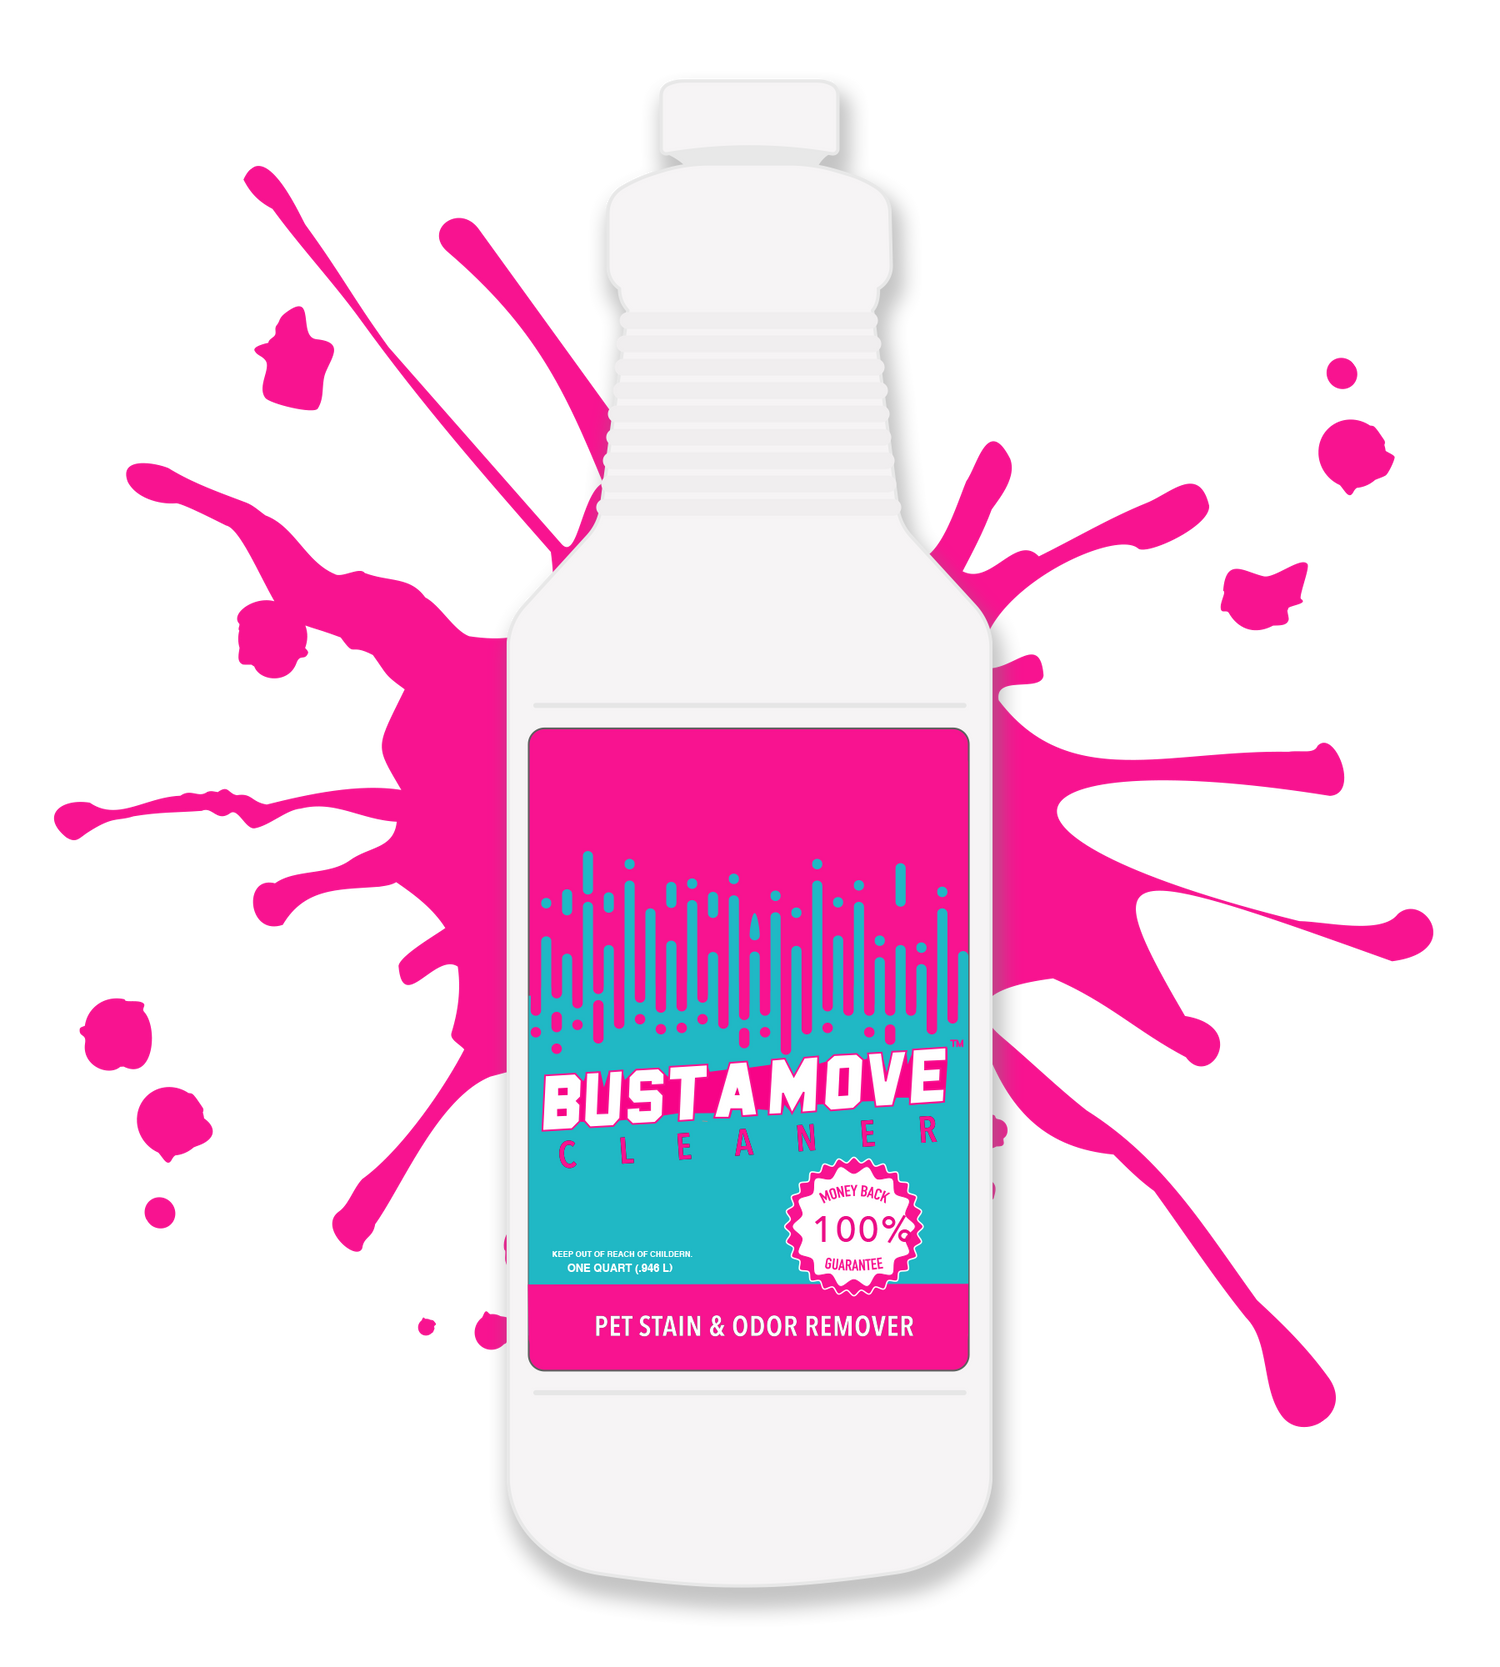 Bust A Move - Pet Stain & Odor Remover